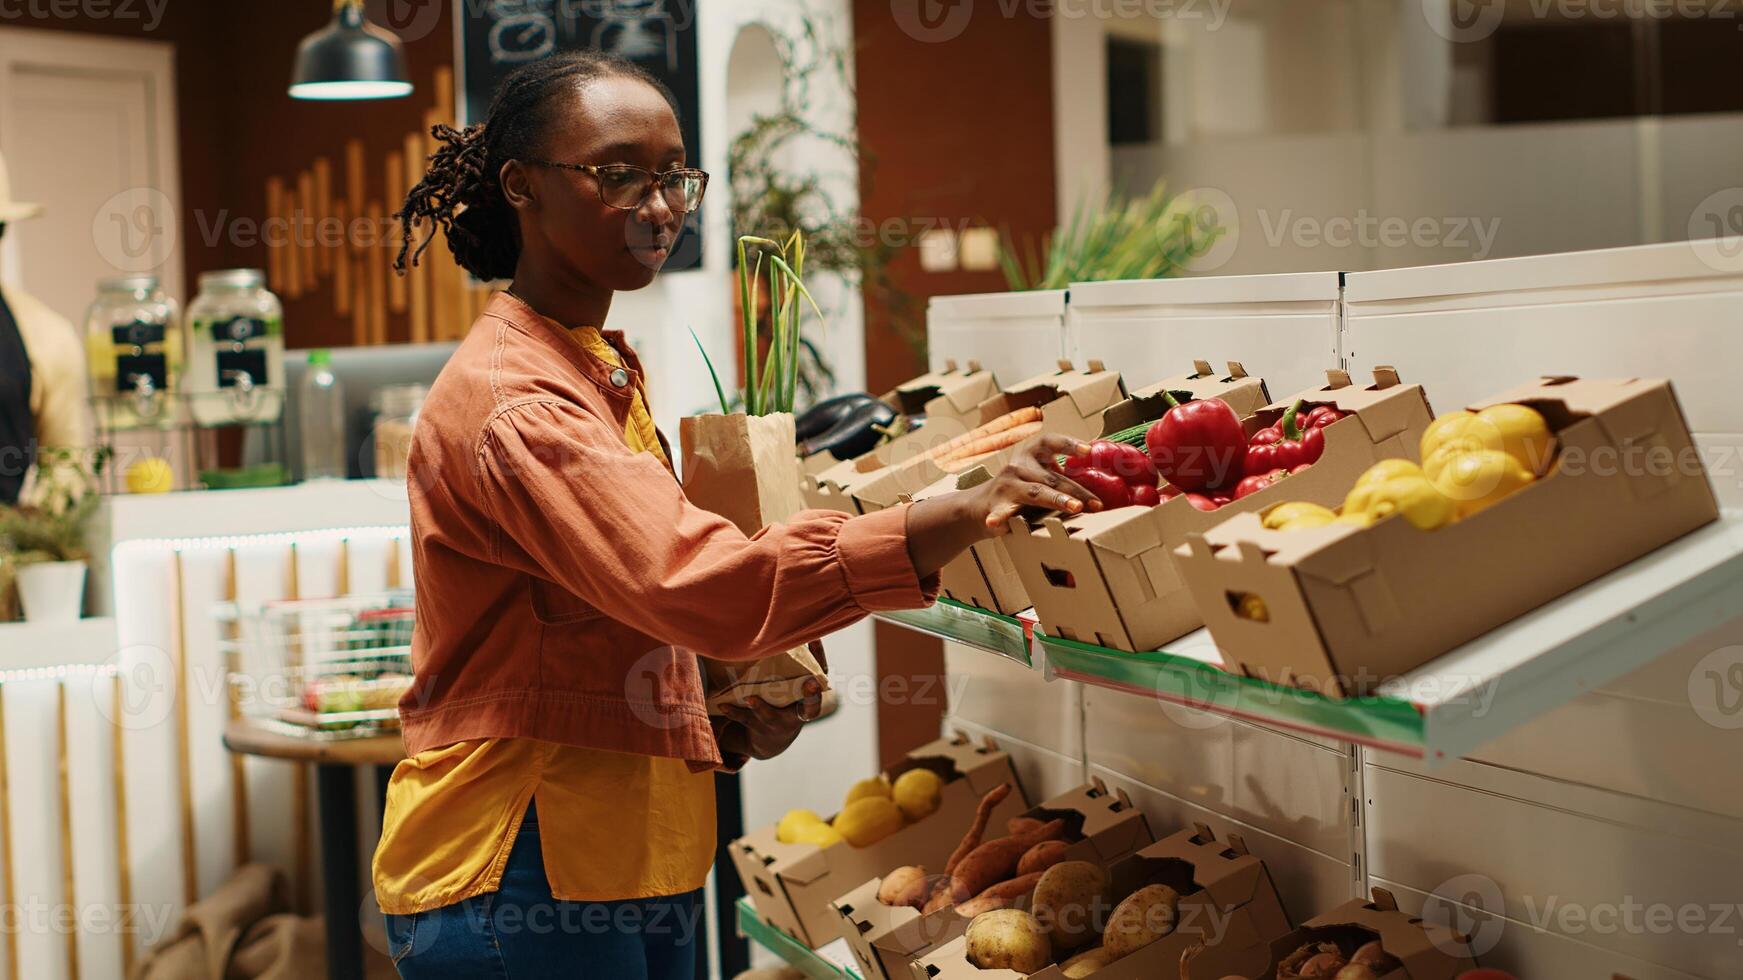 African american buyer choosing organic produce from crates, putting fruits and veggies in a paper bag to purchase. Woman shopping for natural eco friendly products at local farmers market. Camera 1. photo